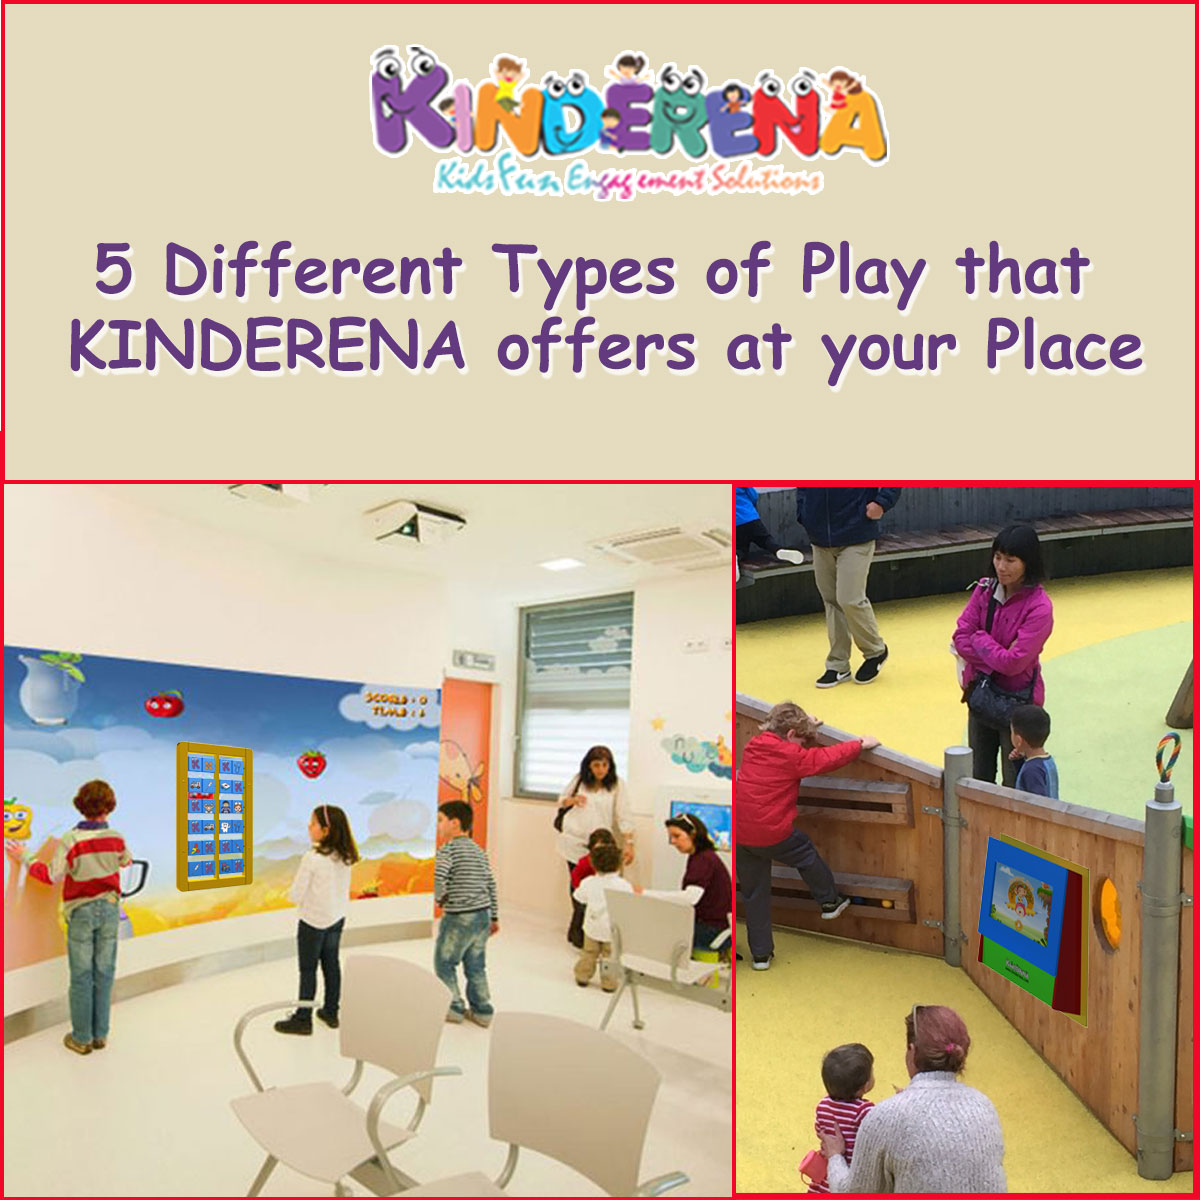 5 Different Types of Play that KINDERENA offers at your Place